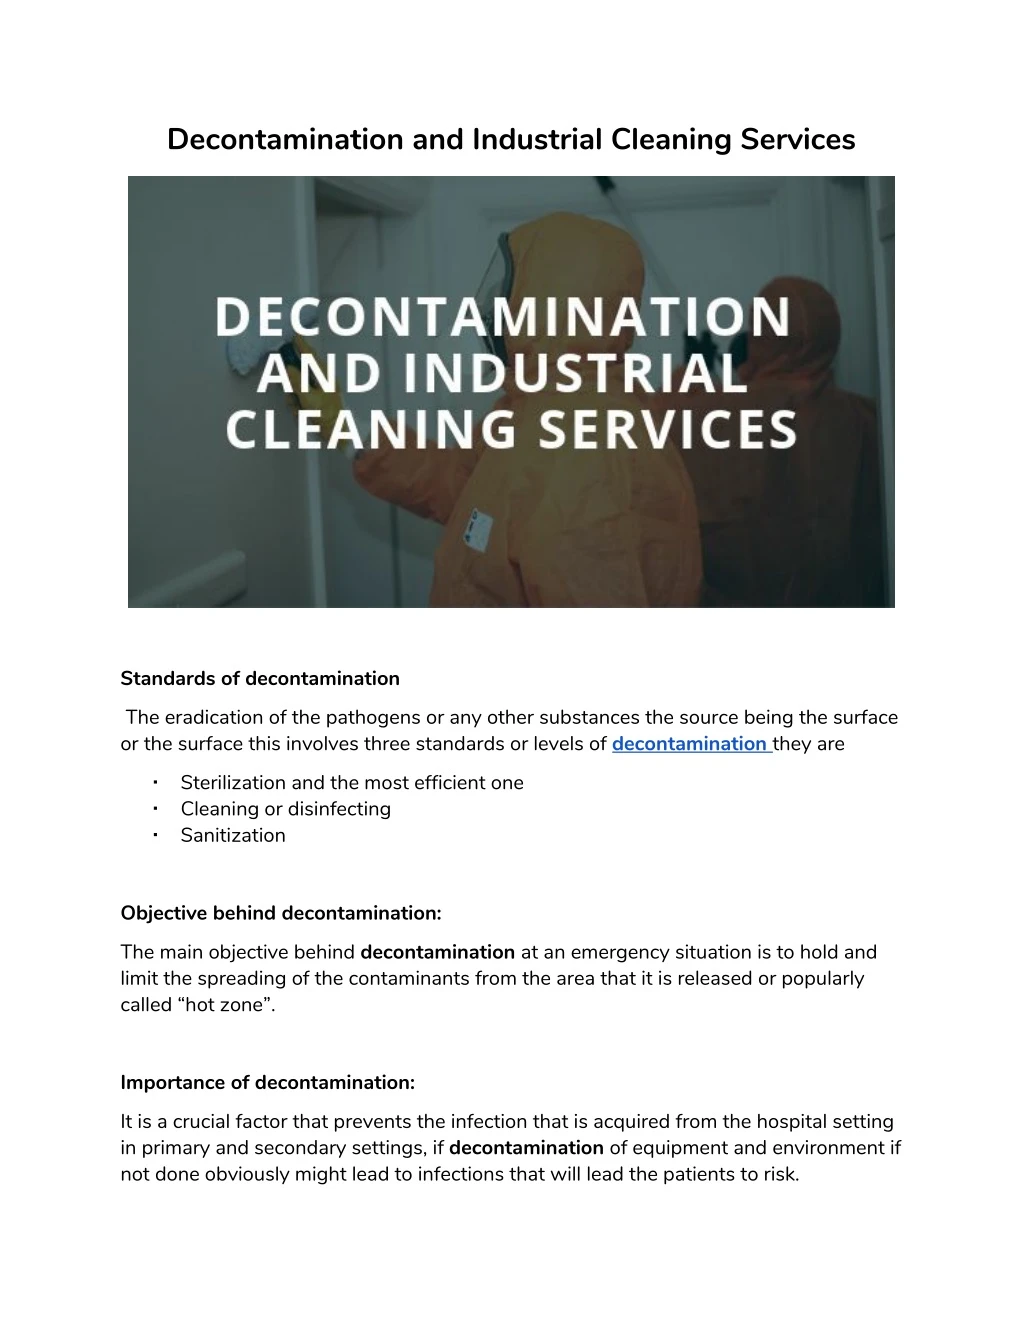 decontamination and industrial cleaning services